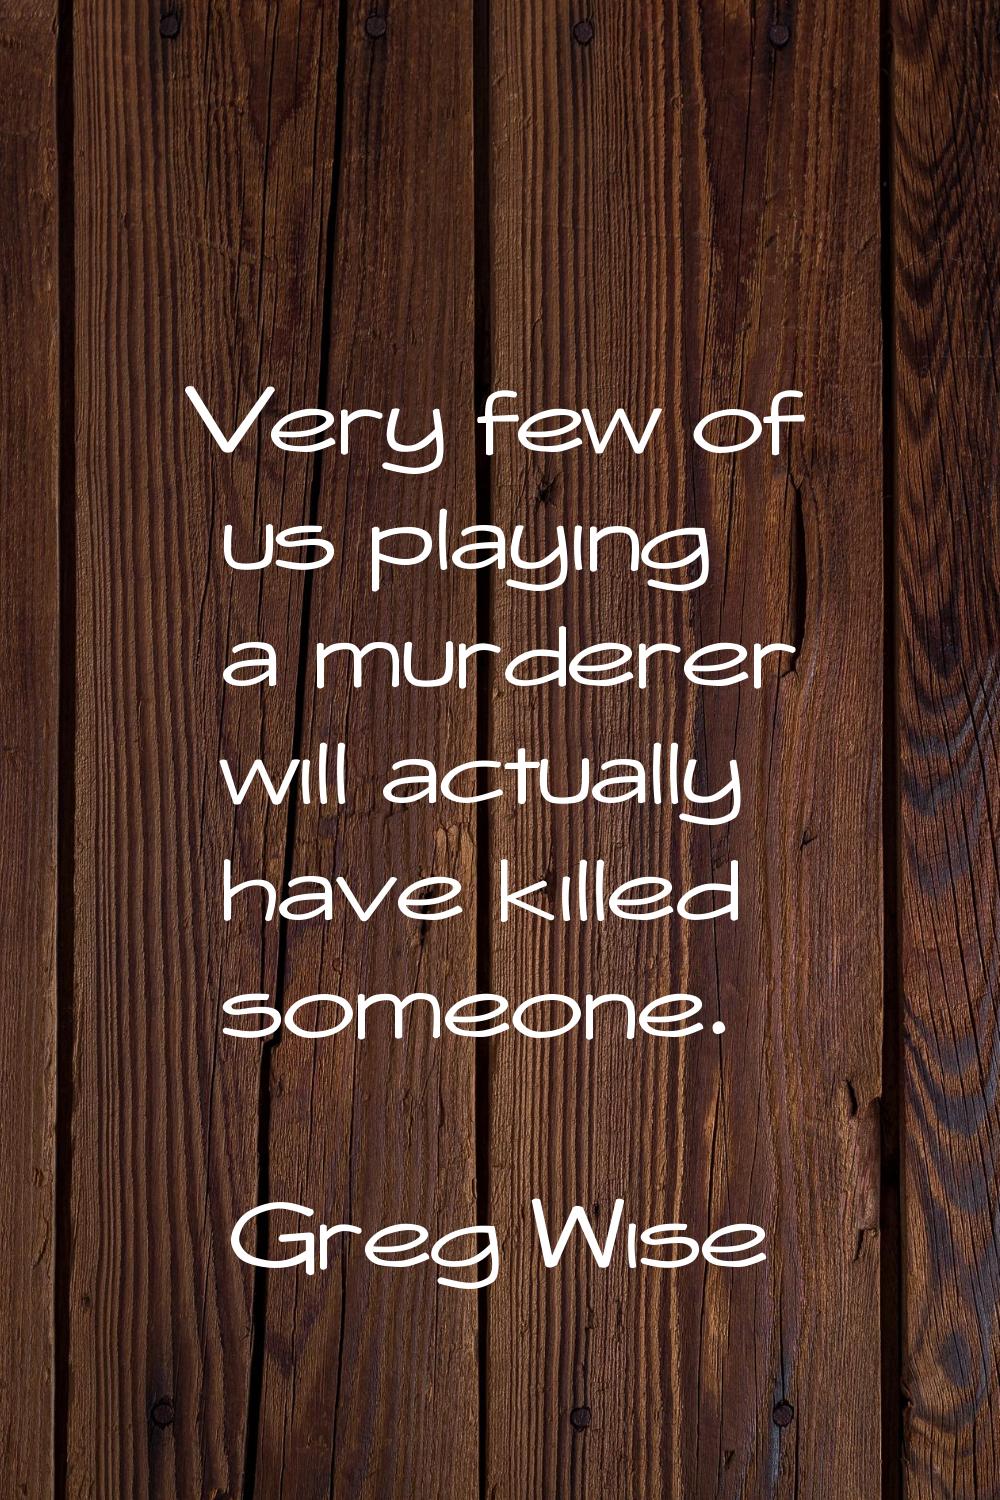 Very few of us playing a murderer will actually have killed someone.